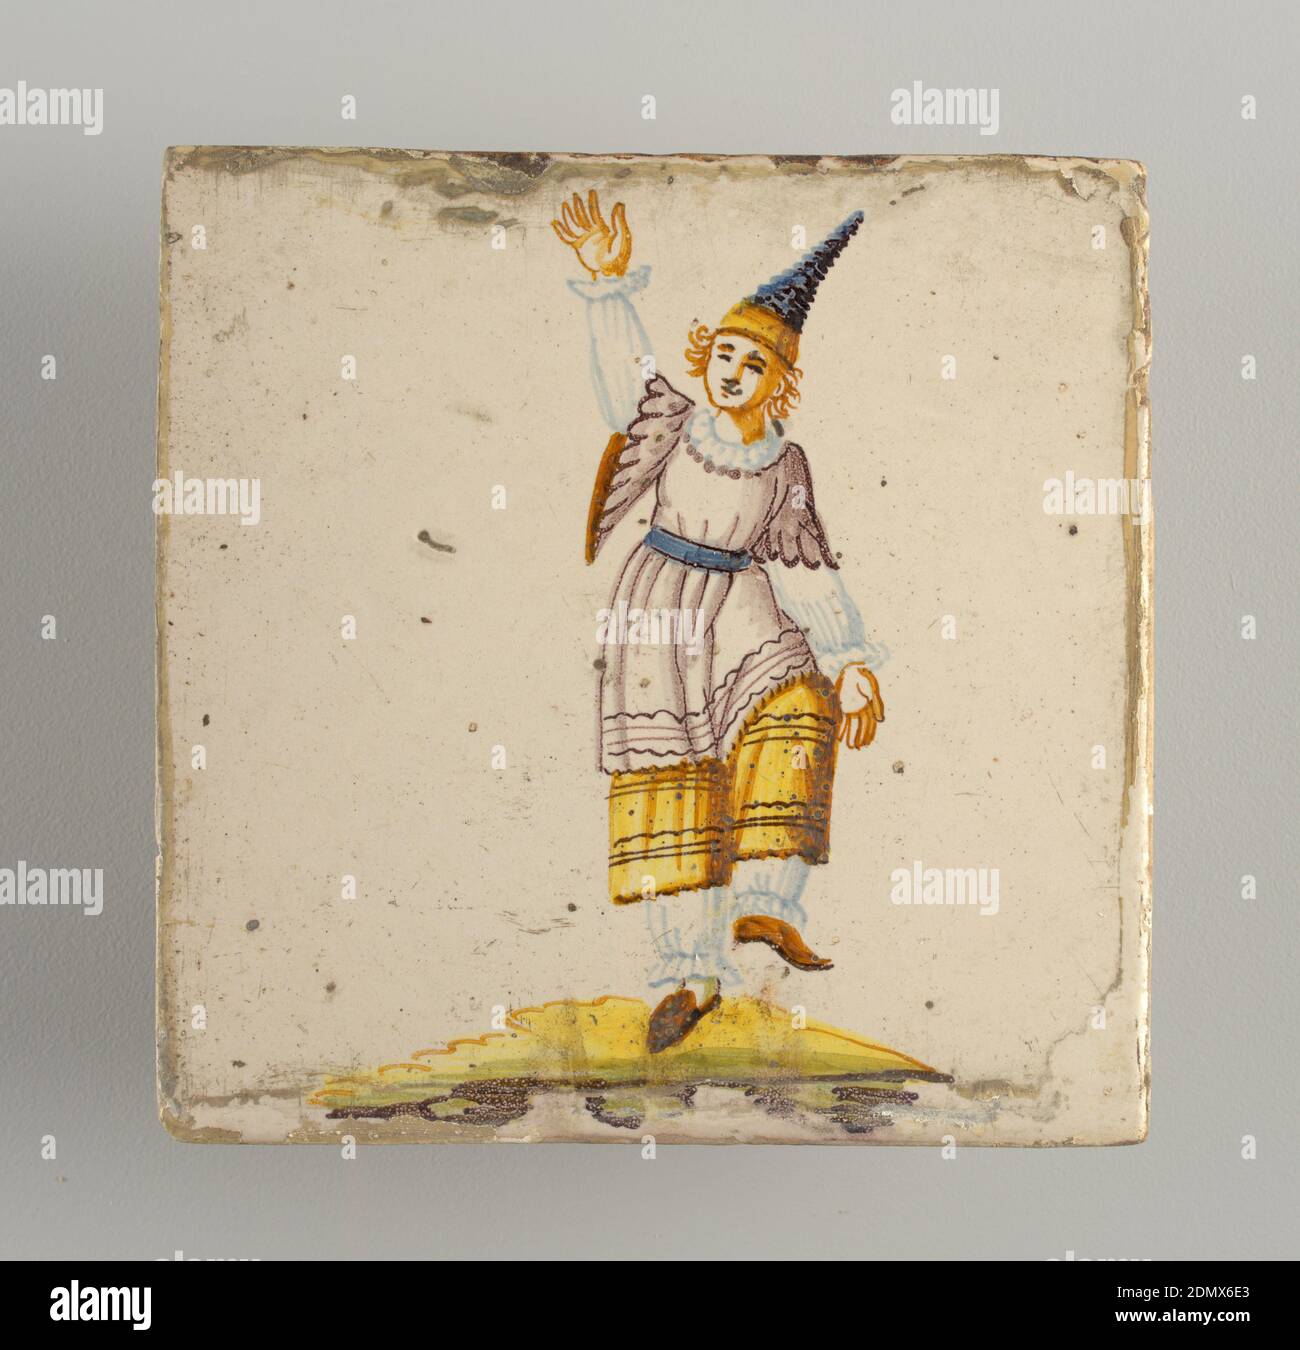 Tile, Earthenware, glazed and high fire decorated, Dancing man, dressed in white pantelettes, yellow skirt, white and manganese overshirt, and wearing pointed blue, brimless hat. Chinoiserie type of decoration ., Alcora, Spain, late 18th–early 19th century, tiles, Decorative Arts, Tile Stock Photo